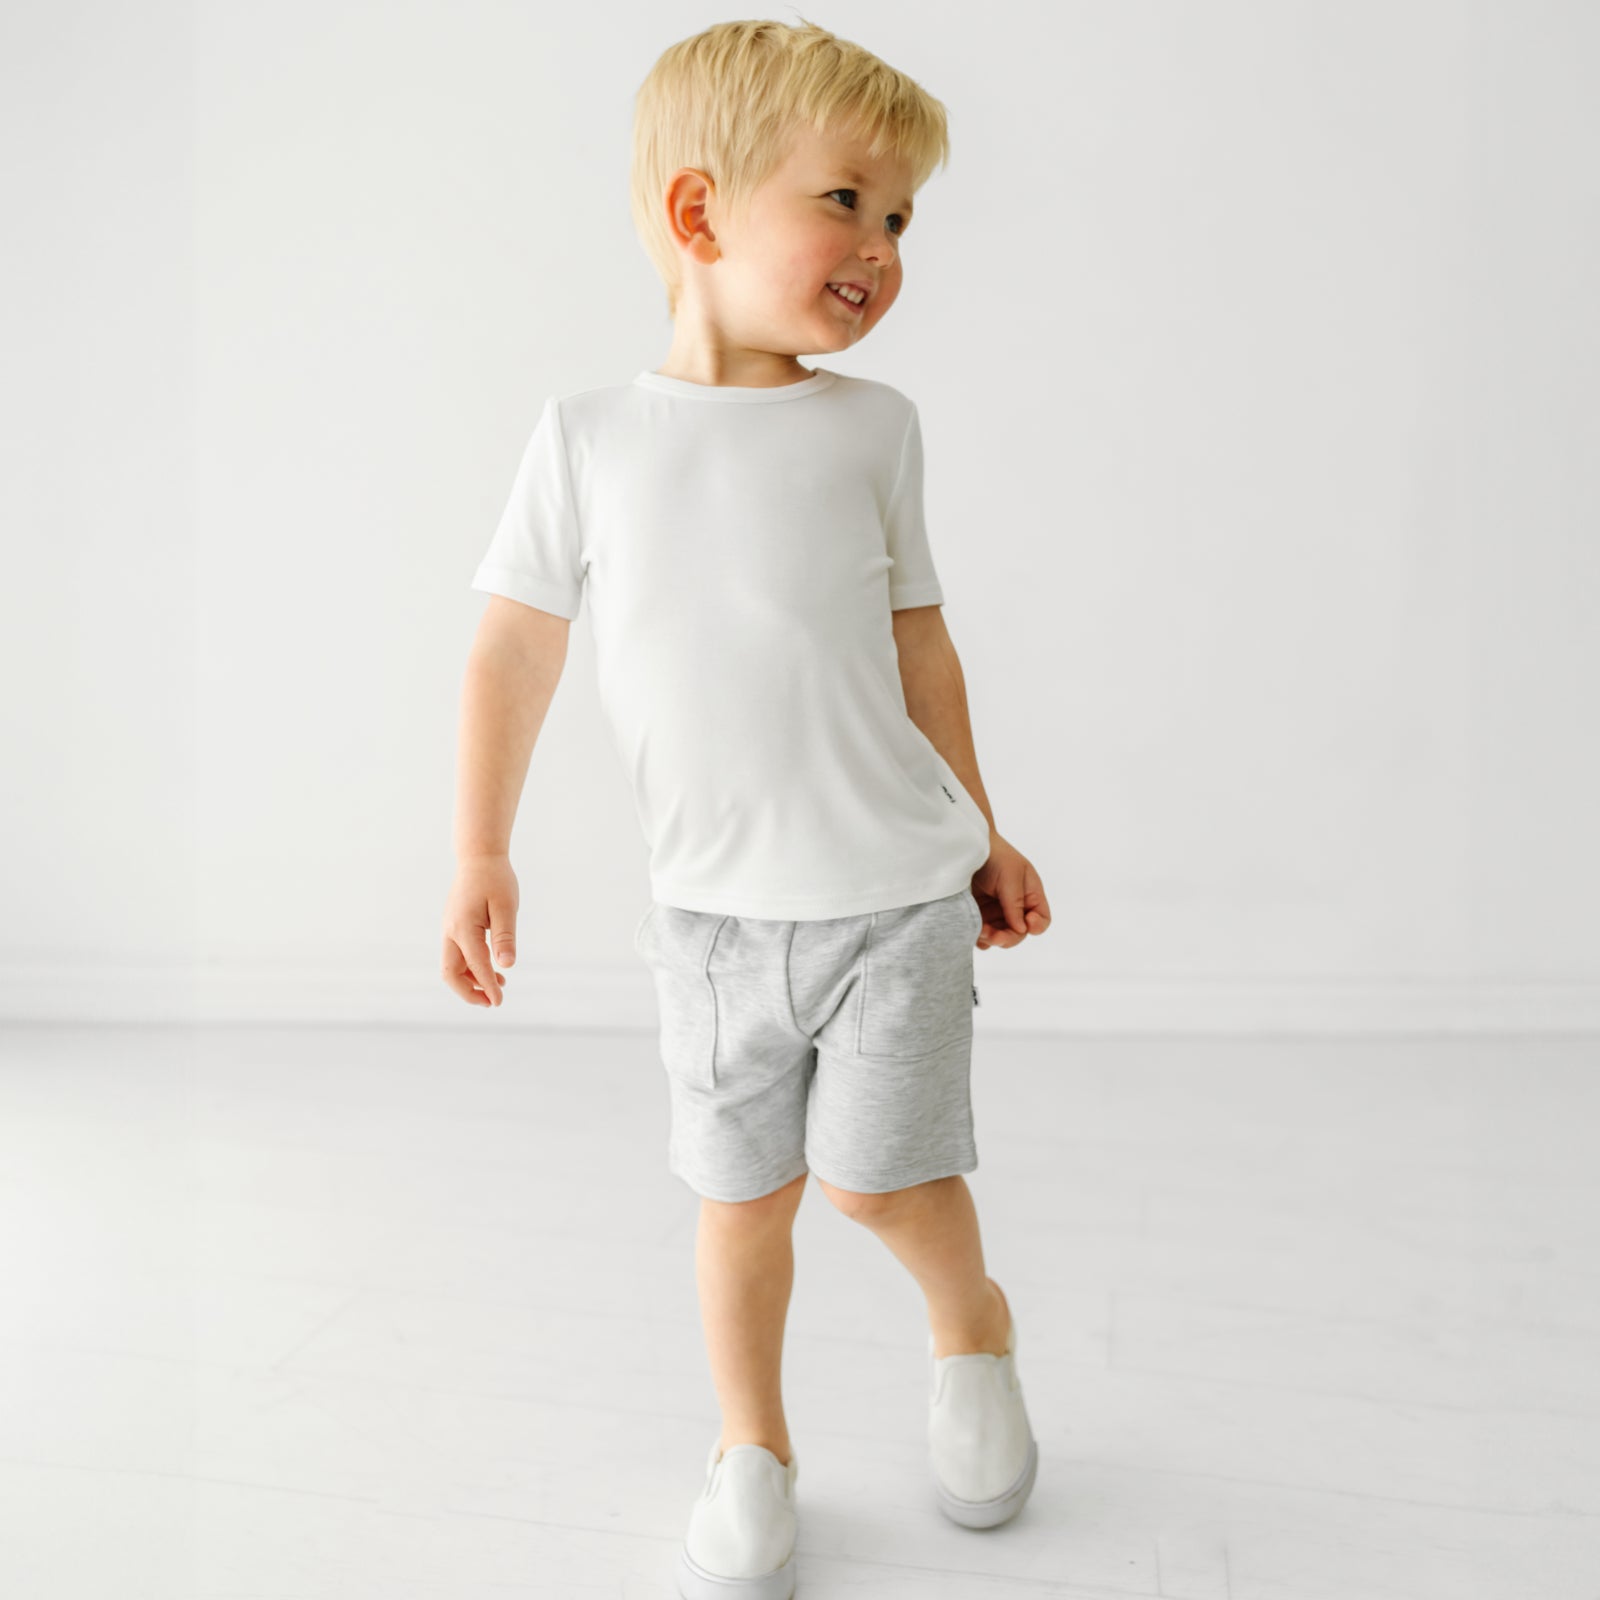 Child wearing Light Heather Gray shorts and coordinating Play top